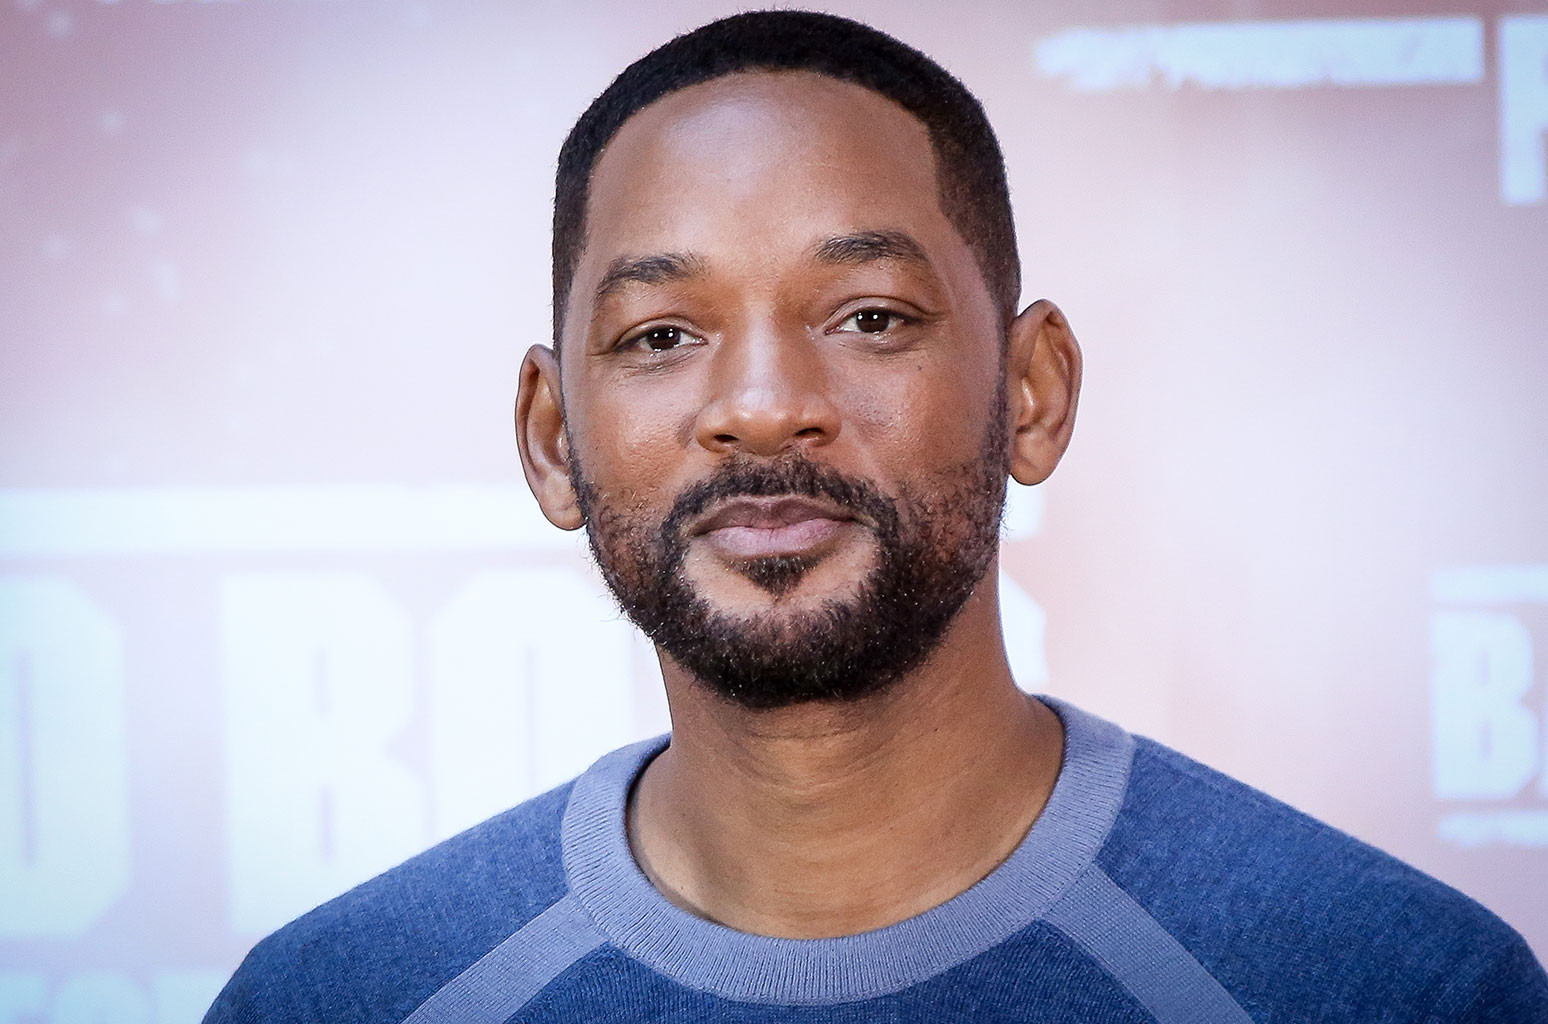 How rich is Will Smith?